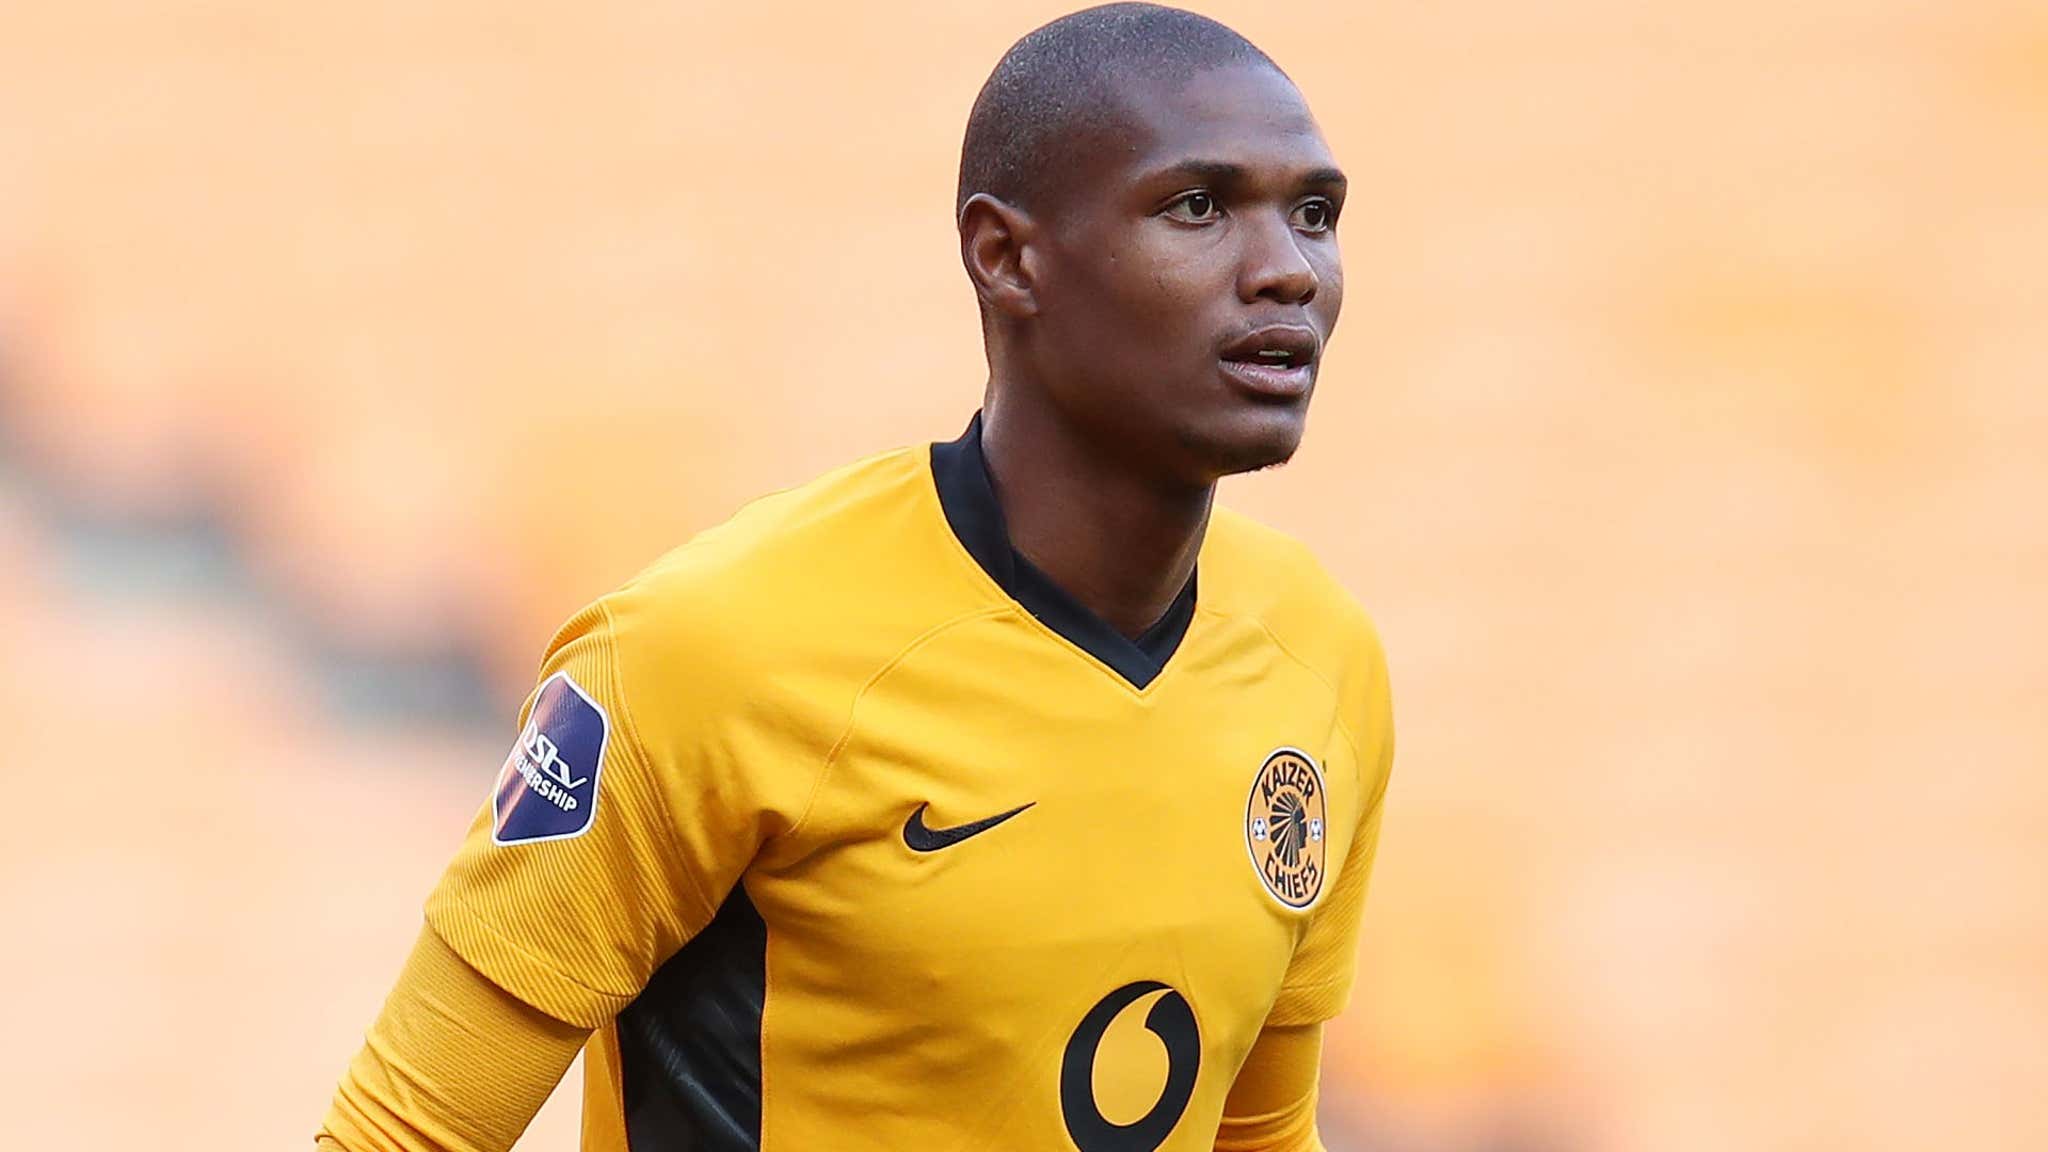 Kaizer Chiefs players ratings after Maritzburg United win: Ngcobo ...